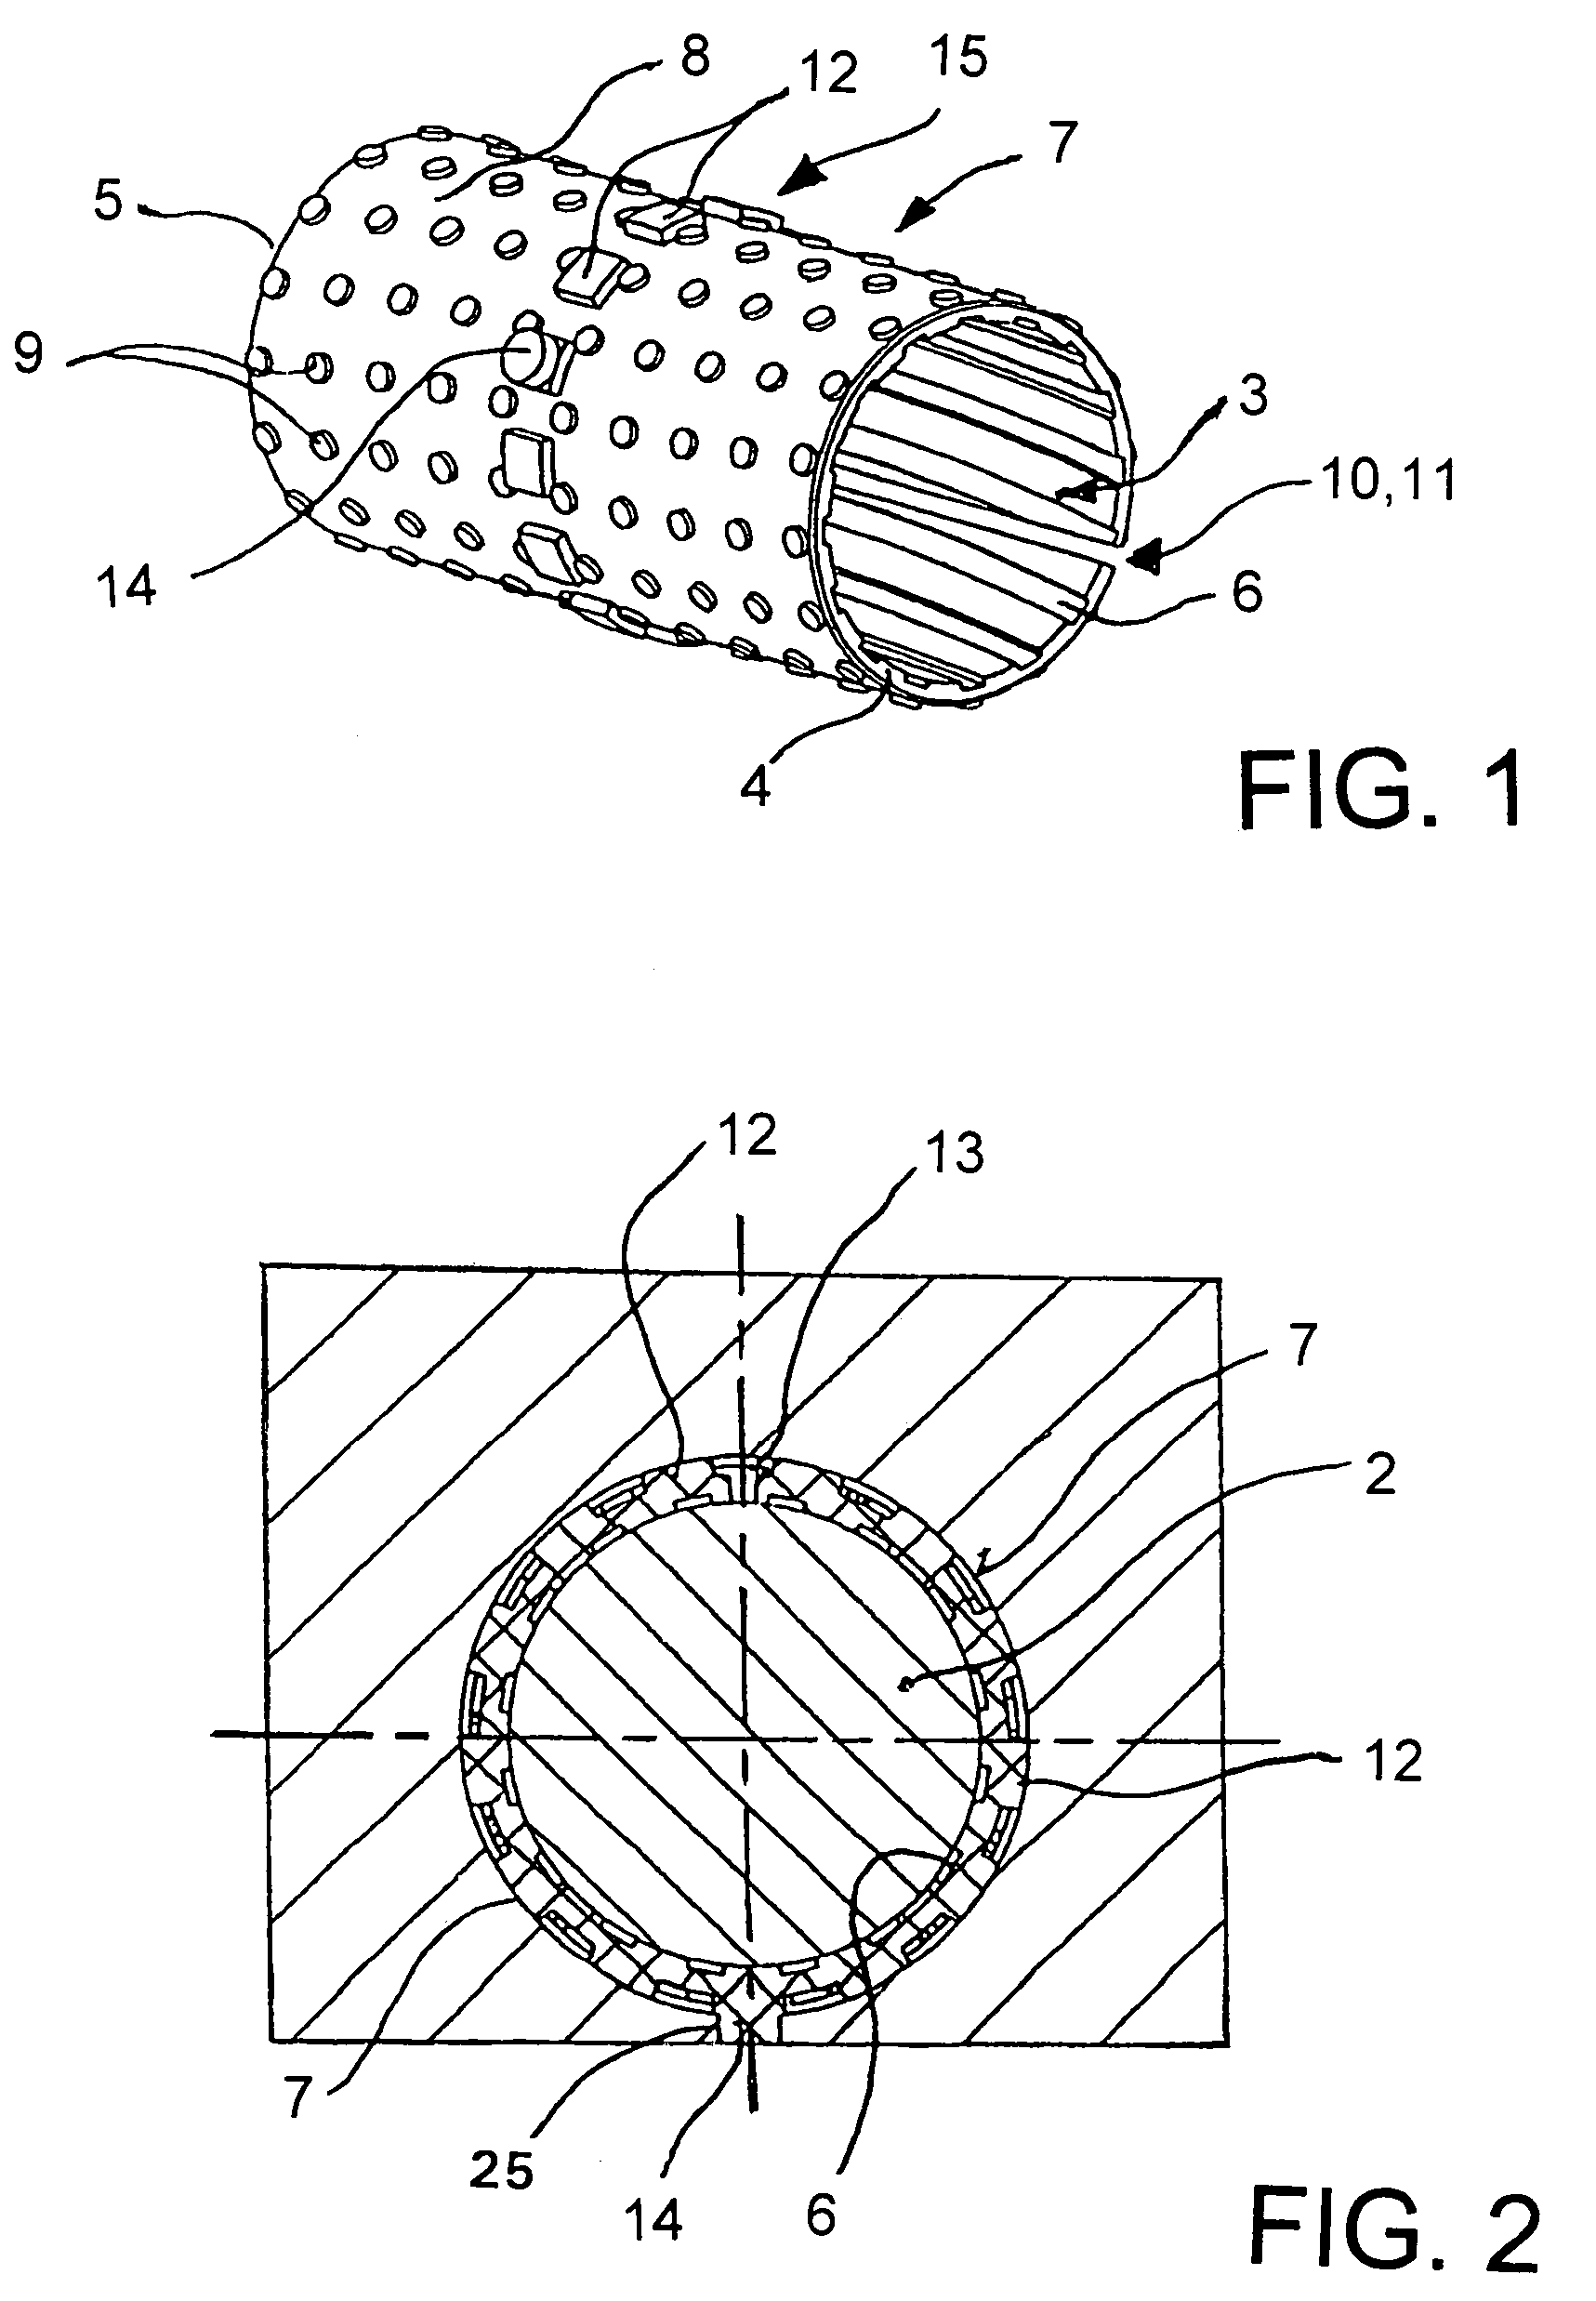 Beverage bottling plant having a beverage bottle closing machine with a bearing system to guide a reciprocating shaft in the beverage bottle closing machine